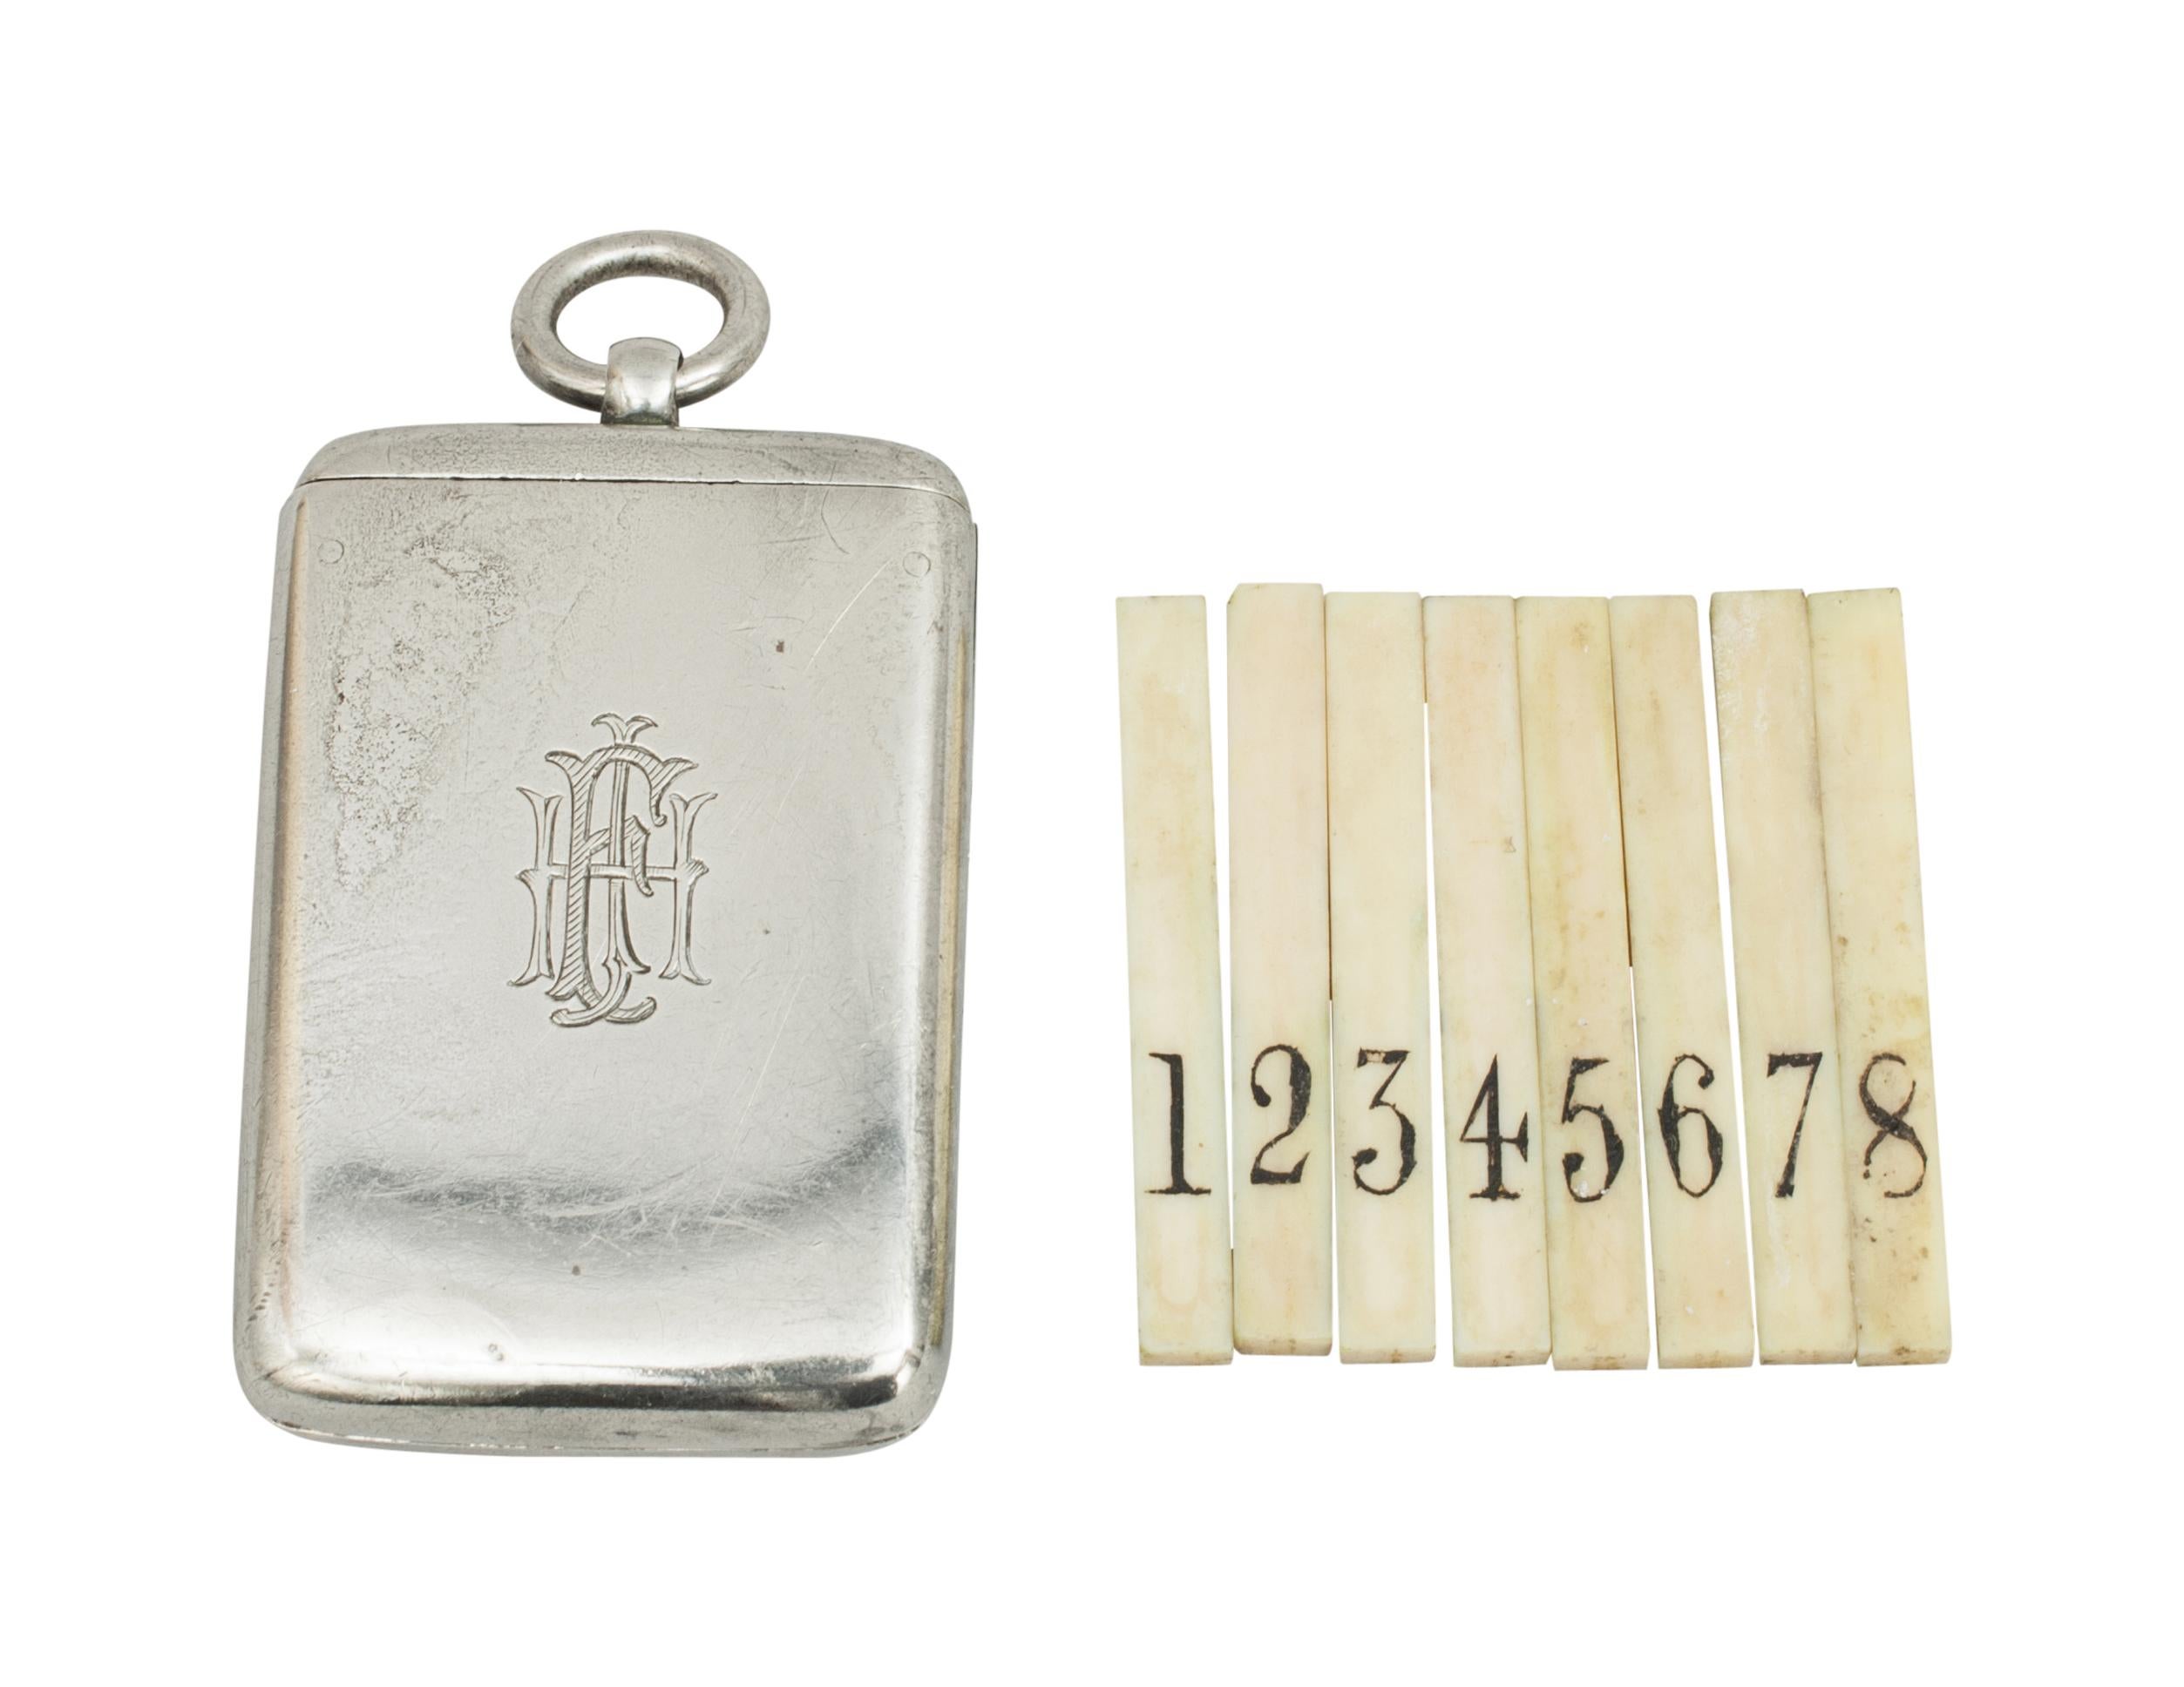 A well crafted and engineered silver plated shooting field place finder or butt marker. The case is very similar to a vesta case but when the top is slid back the interior pops up to reveal 8 removable numbered pegs. The pegs are made of bone and